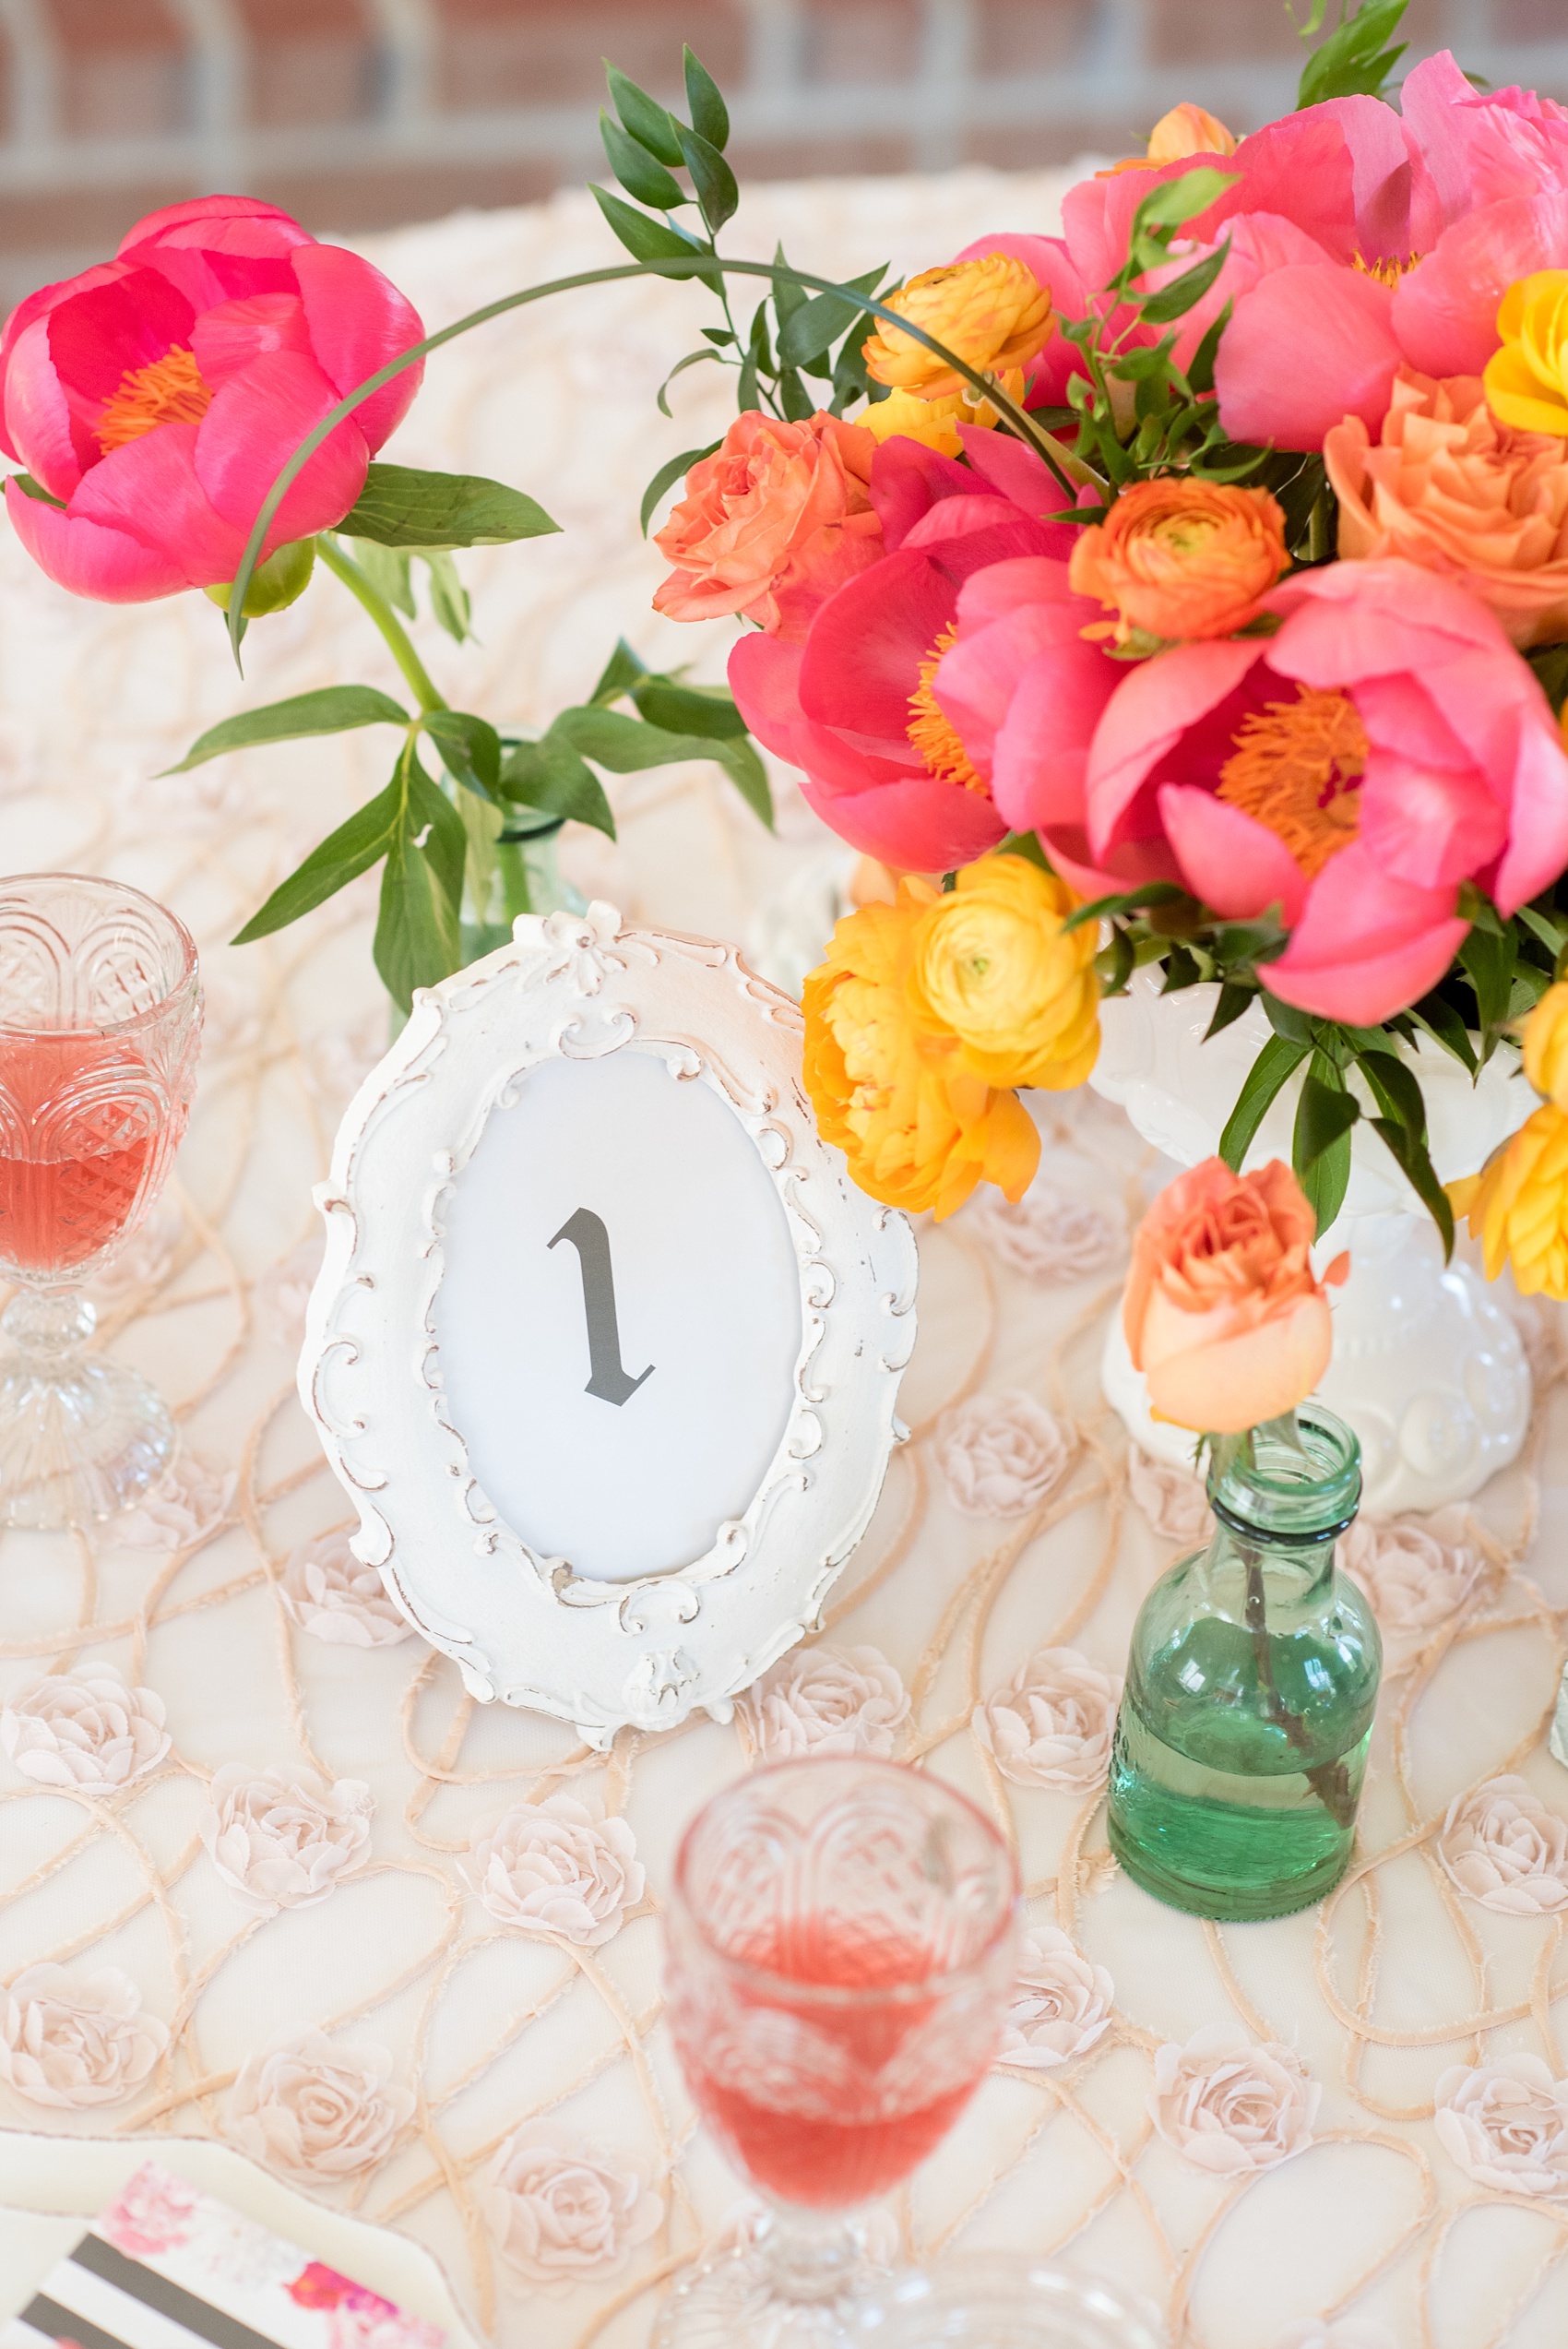 Mikkel Paige Photography wedding photo at The Bradford, NC. White shabby chic frame holds the table number.